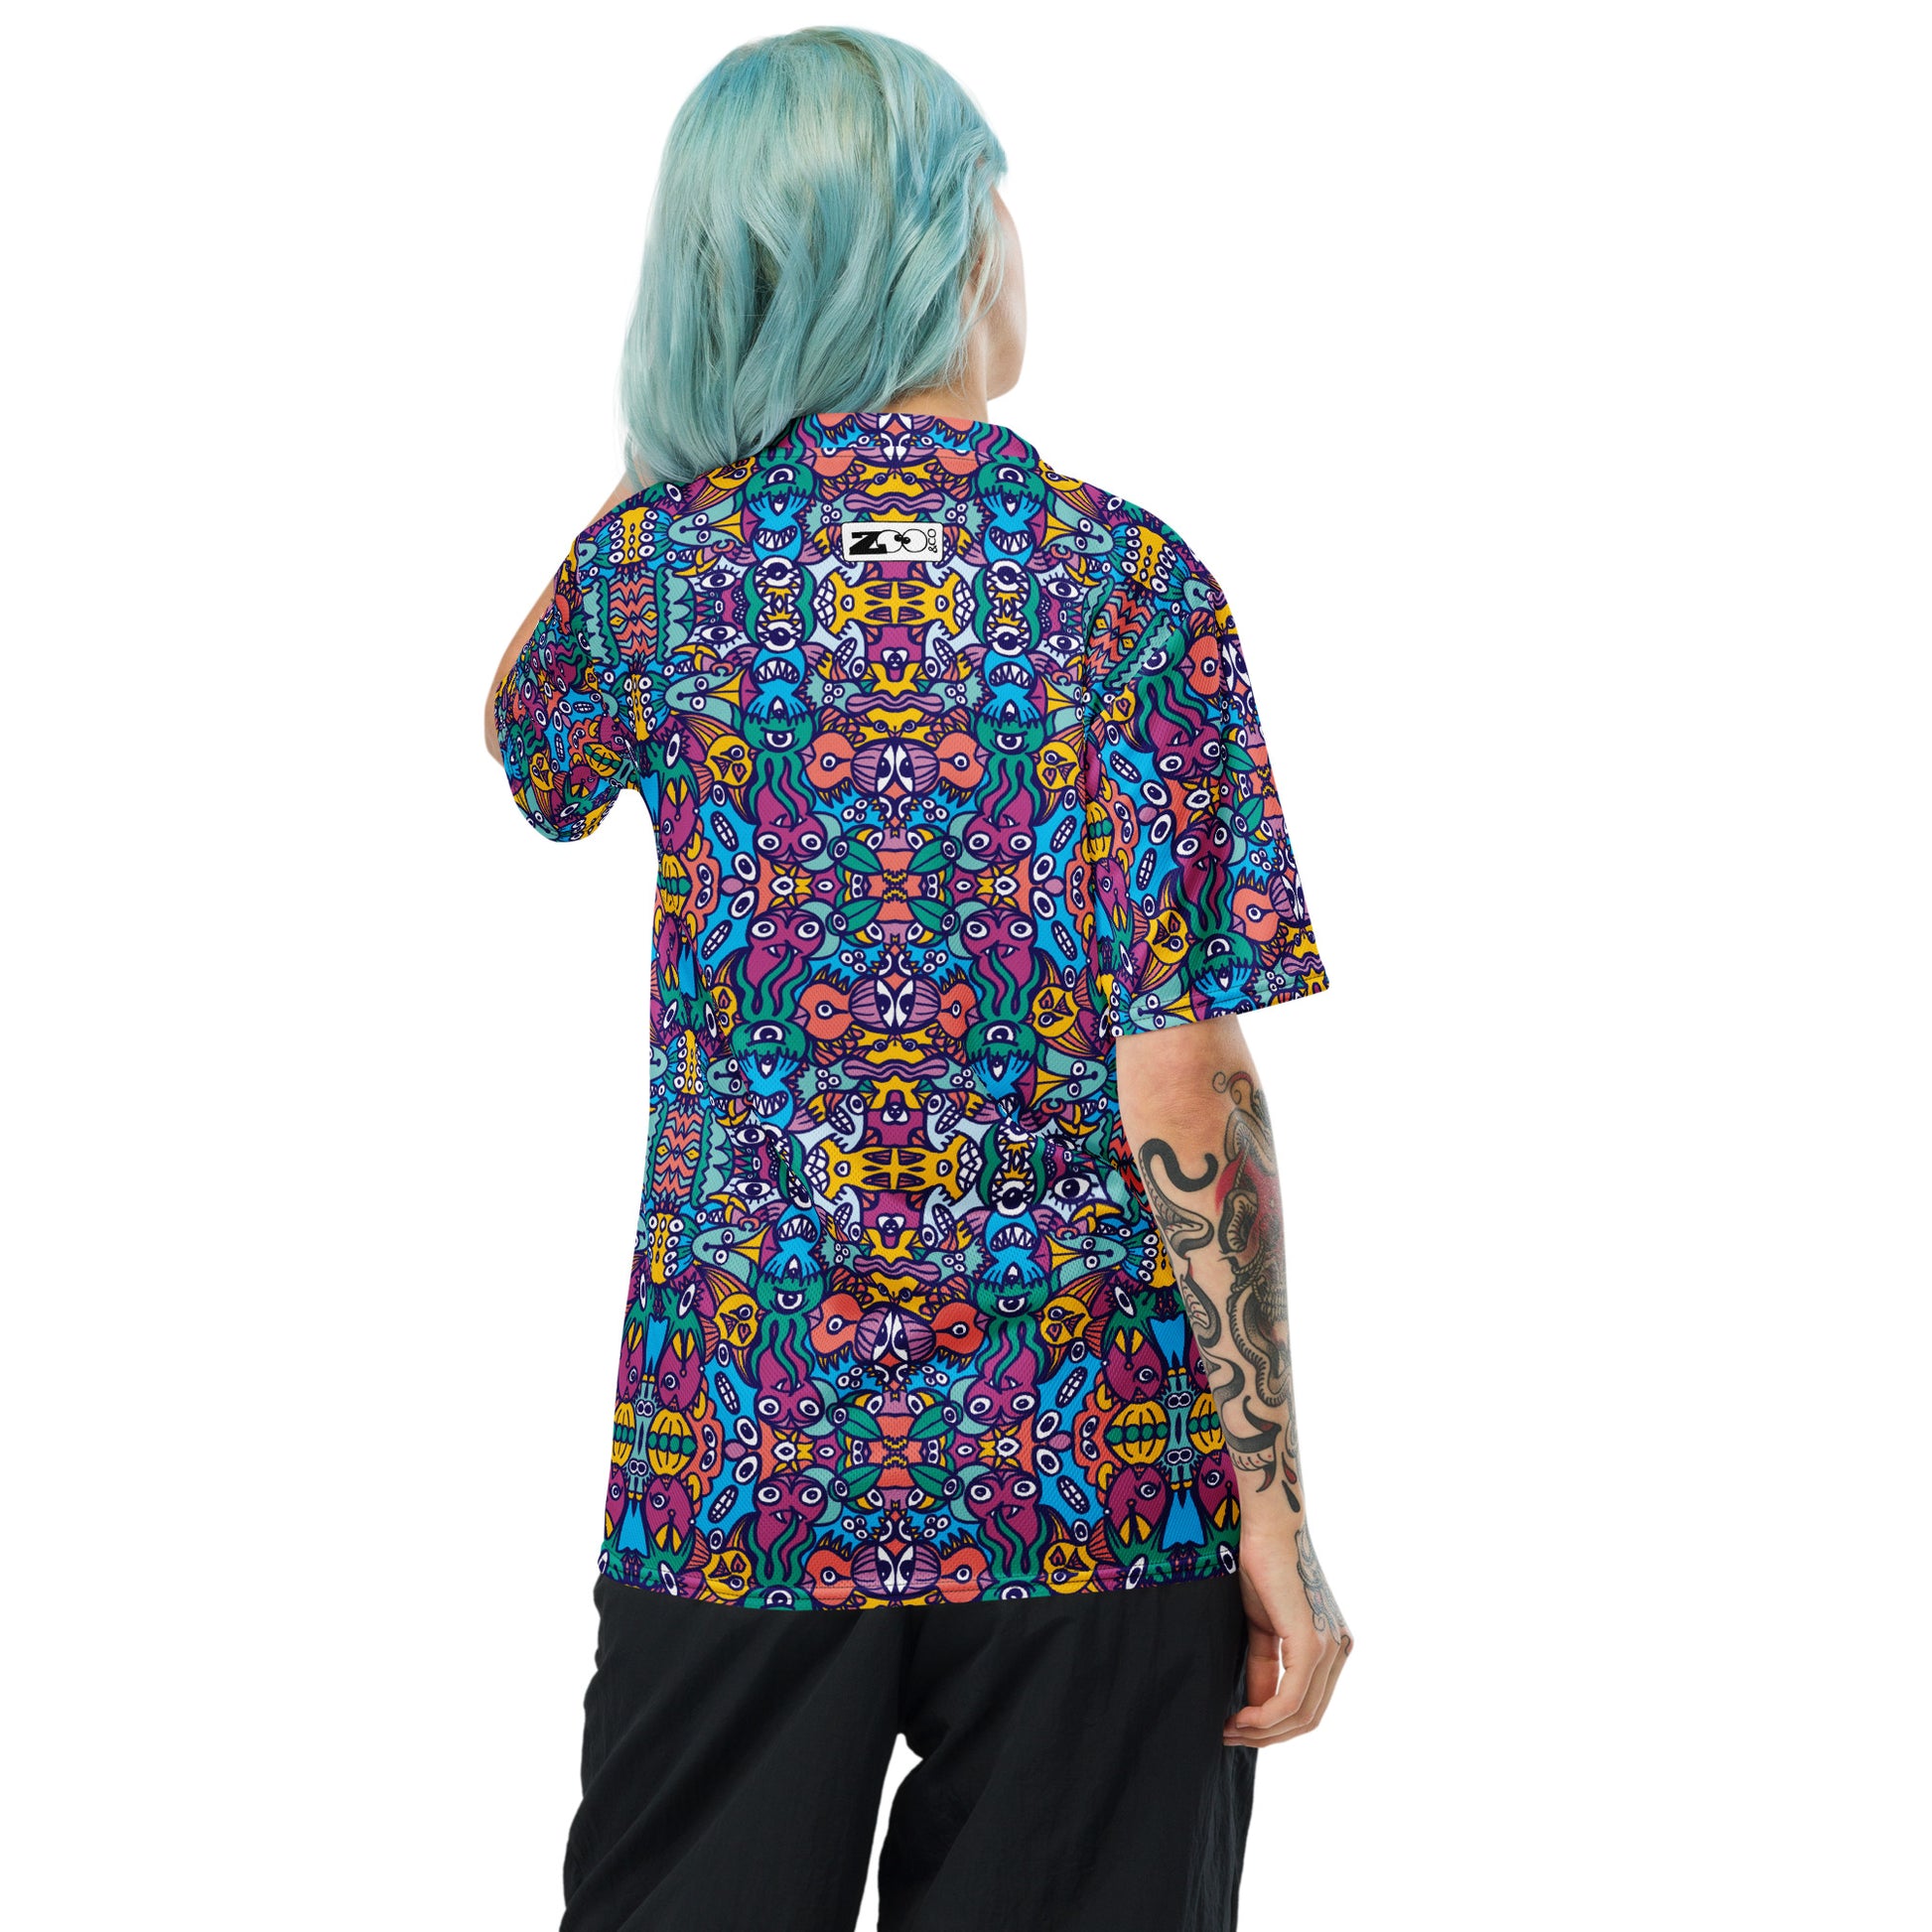 Woman wearing Whimsical design featuring multicolor critters from an alien world Recycled unisex sports jersey. Back view